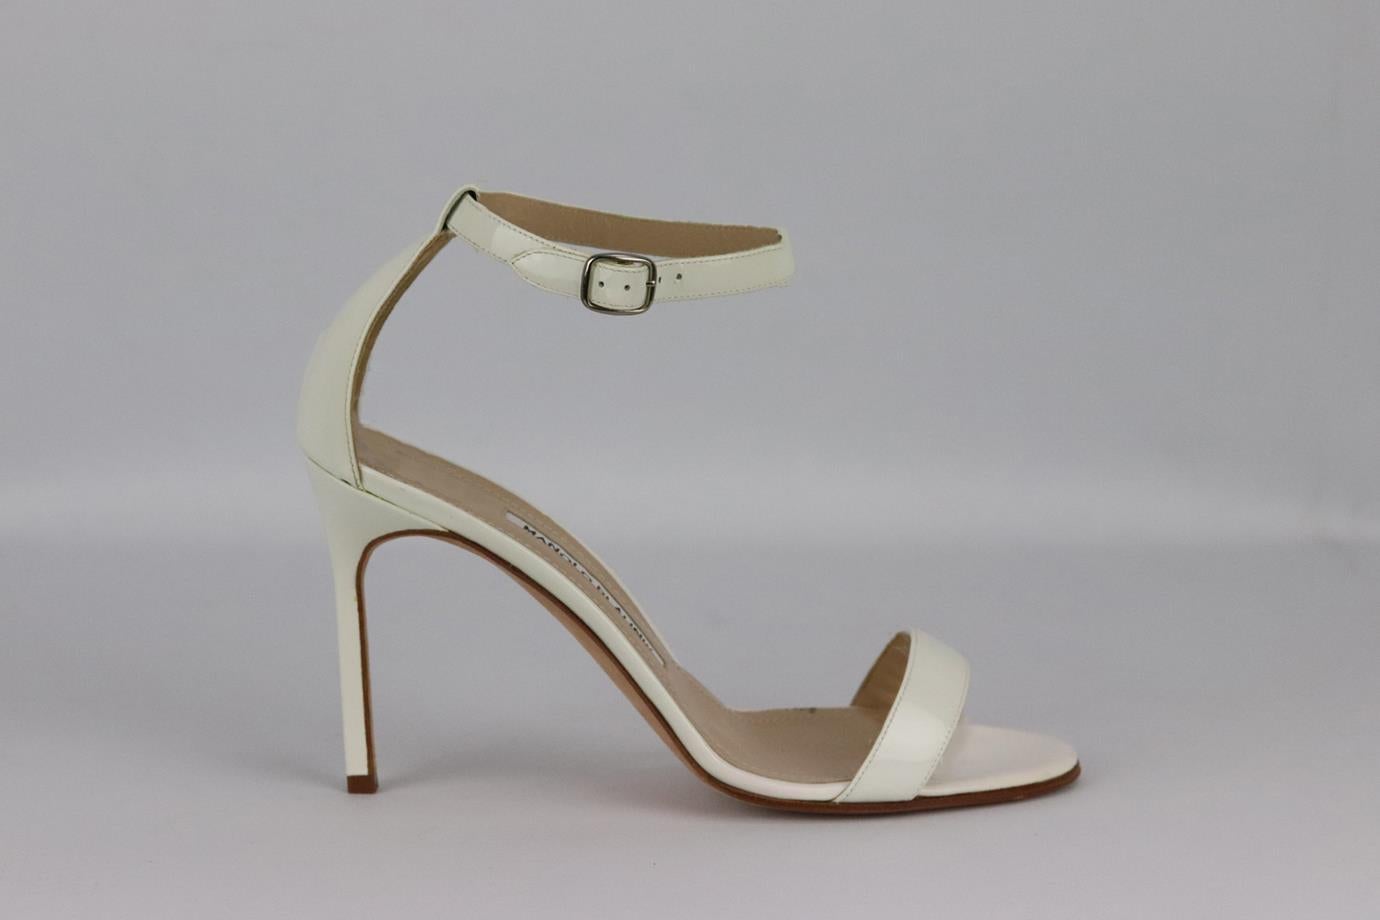 Manolo Blahnik patent leather sandals. White. Buckle fastening at side. Does not come with dustbag and box. Size: EU 37.5 (UK 4.5, US 7.5). Insole: 9.5 in. Heel: 3 in. Very good condition - Light wear to soles. Light marks to upper material; see